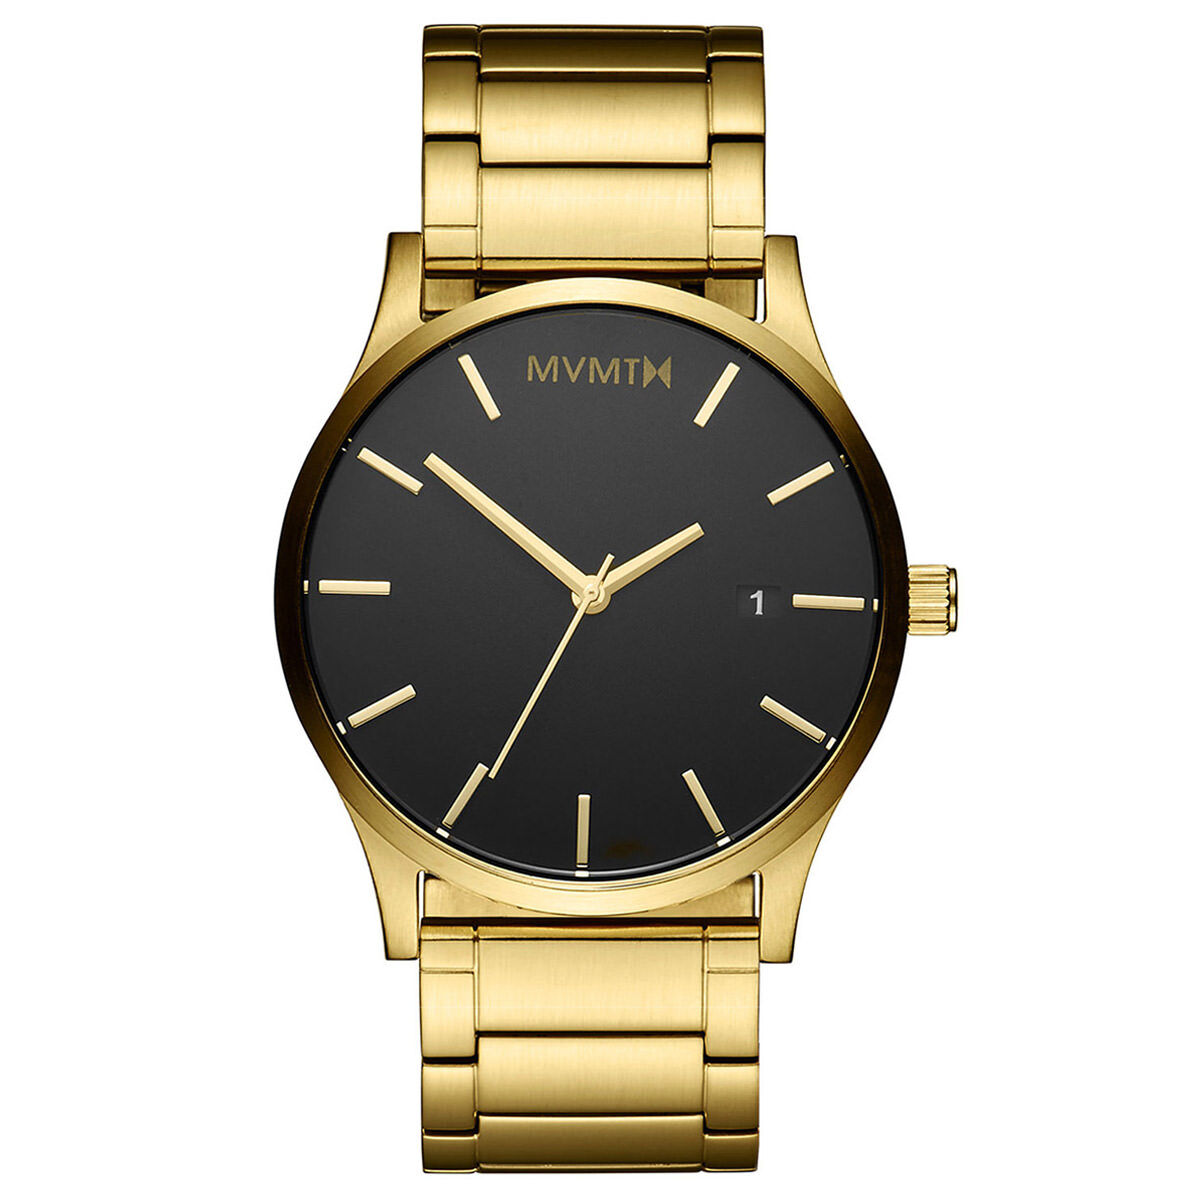 SOLD OUT Classic - 45MM Black Gold €110.00 Add to Cart Add to 